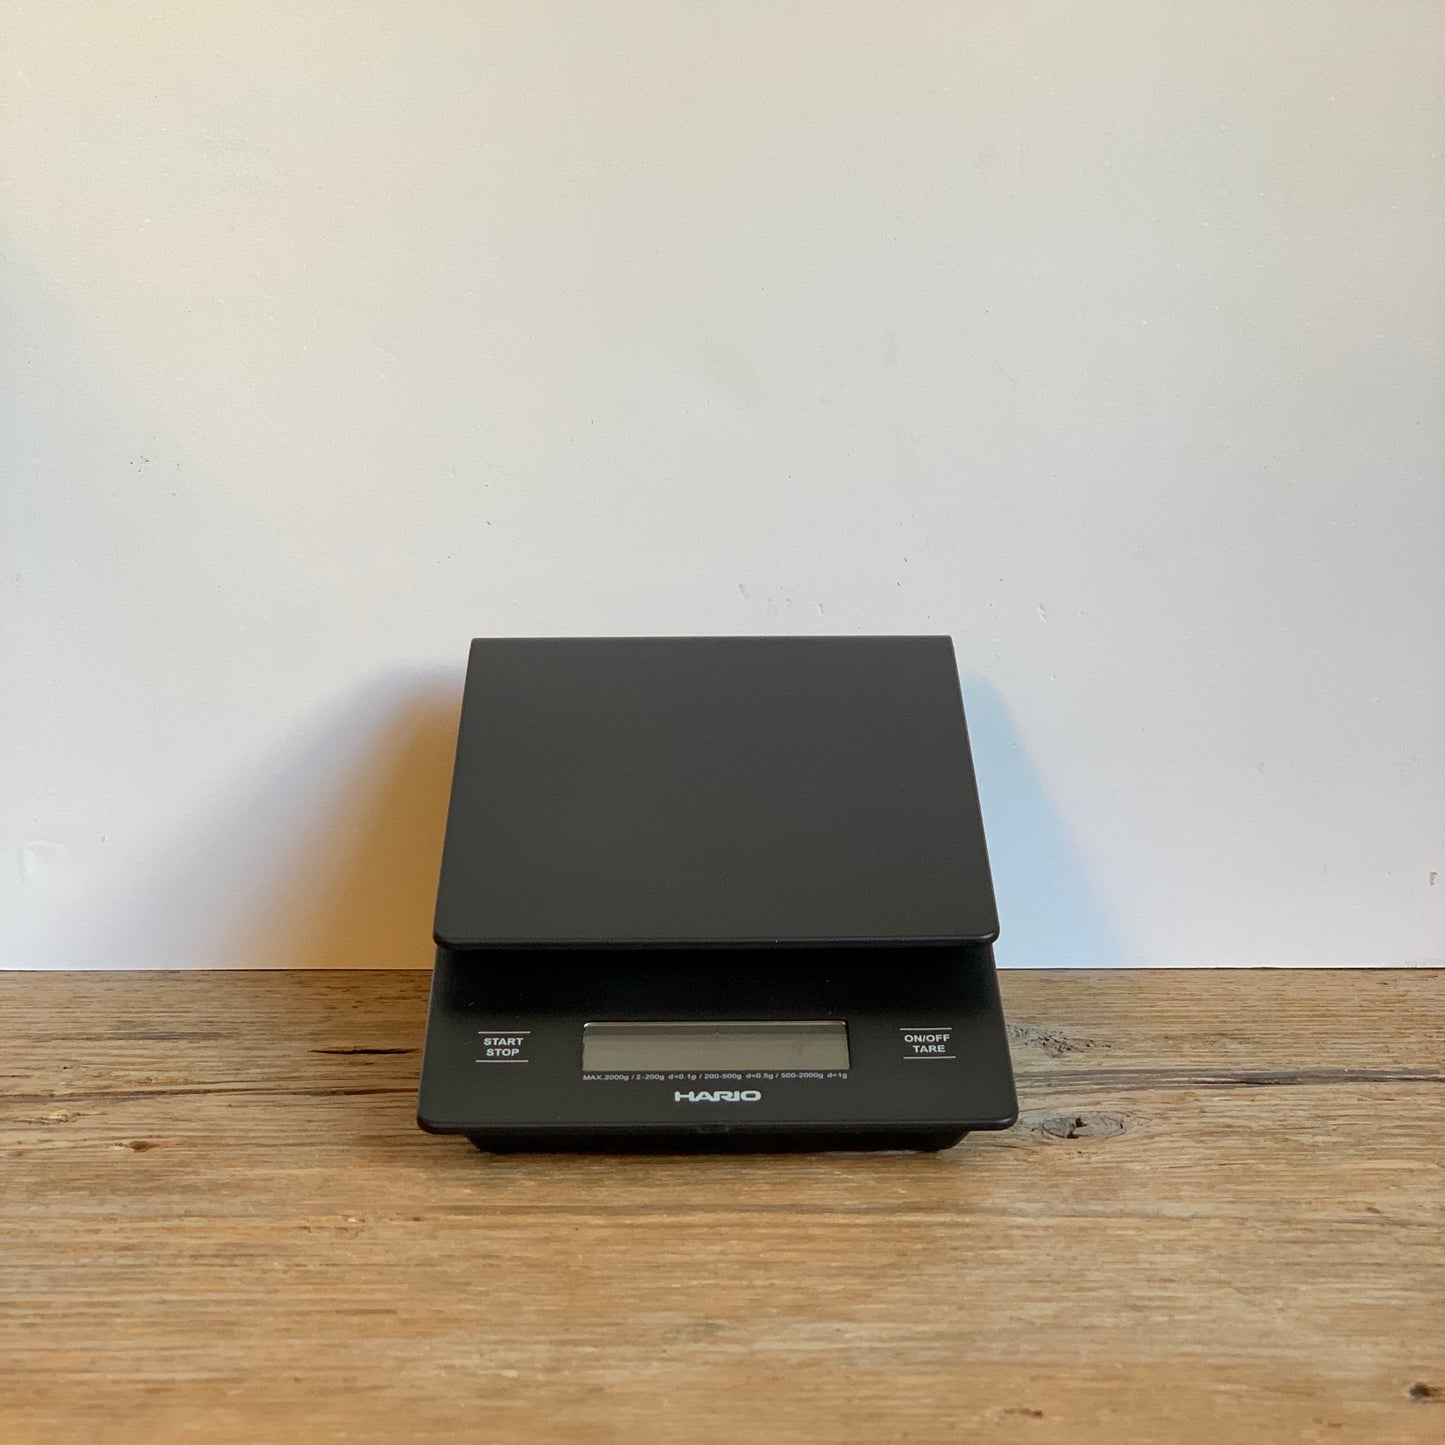 HARIO SCALE WITH BUILT IN TIMER SLIGHTLY UPRIGHT ON A WHITE WALL, PLACED ON A WOODEN TABLE  (9427968455)